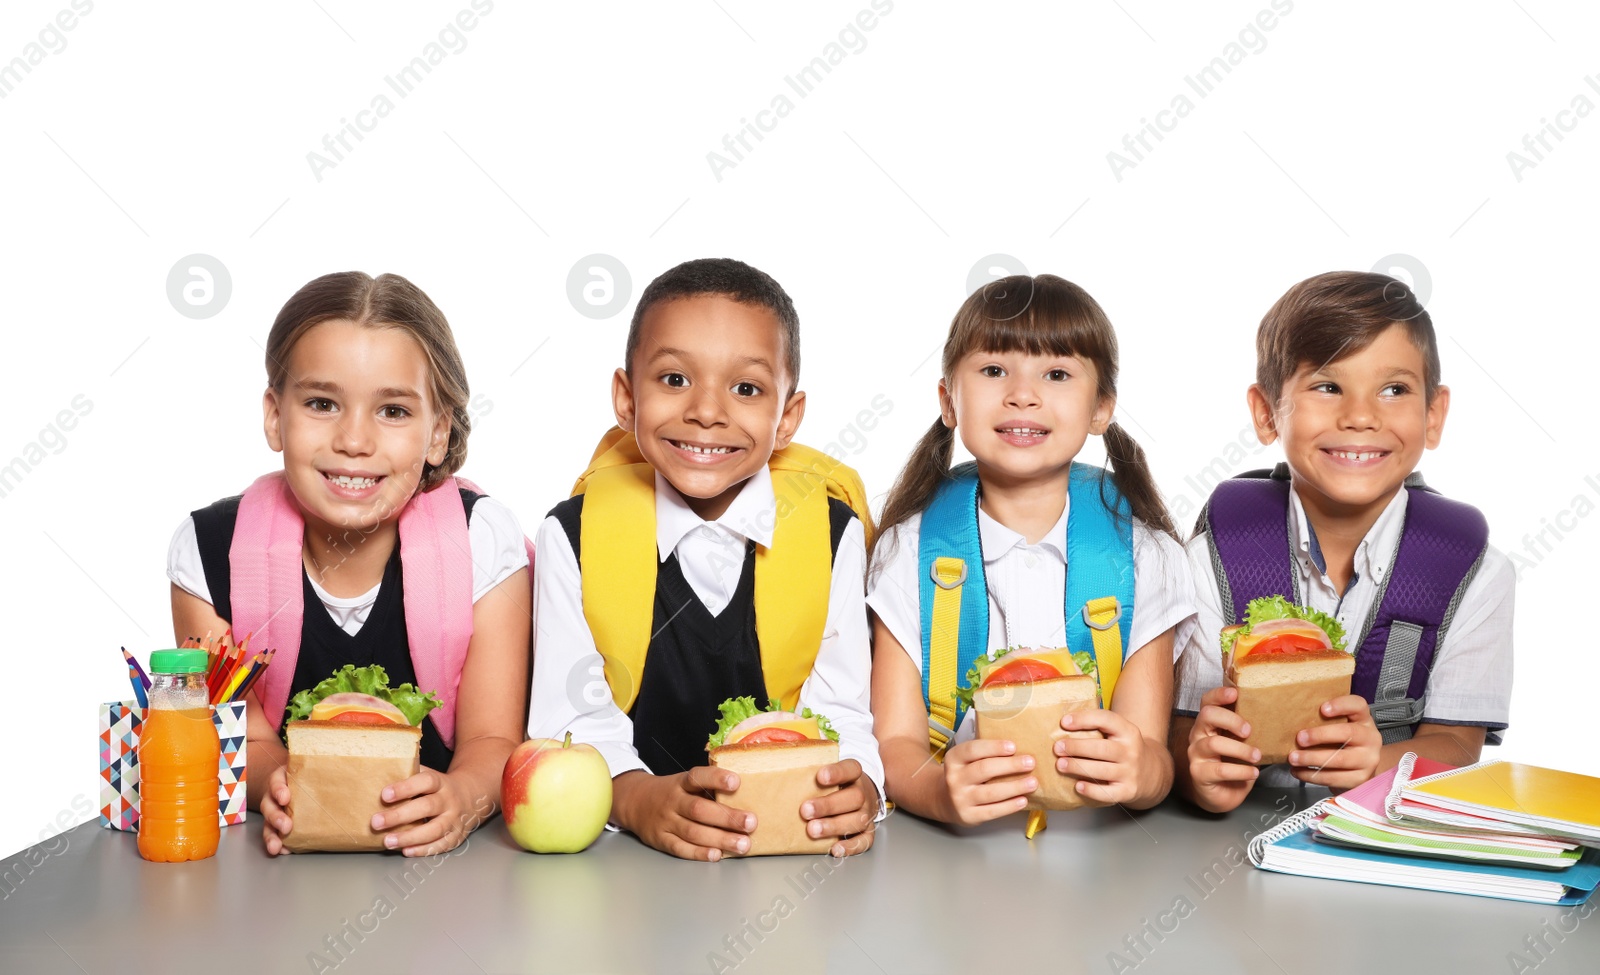 Photo of Schoolchildren with healthy food and backpacks sitting at table on white background